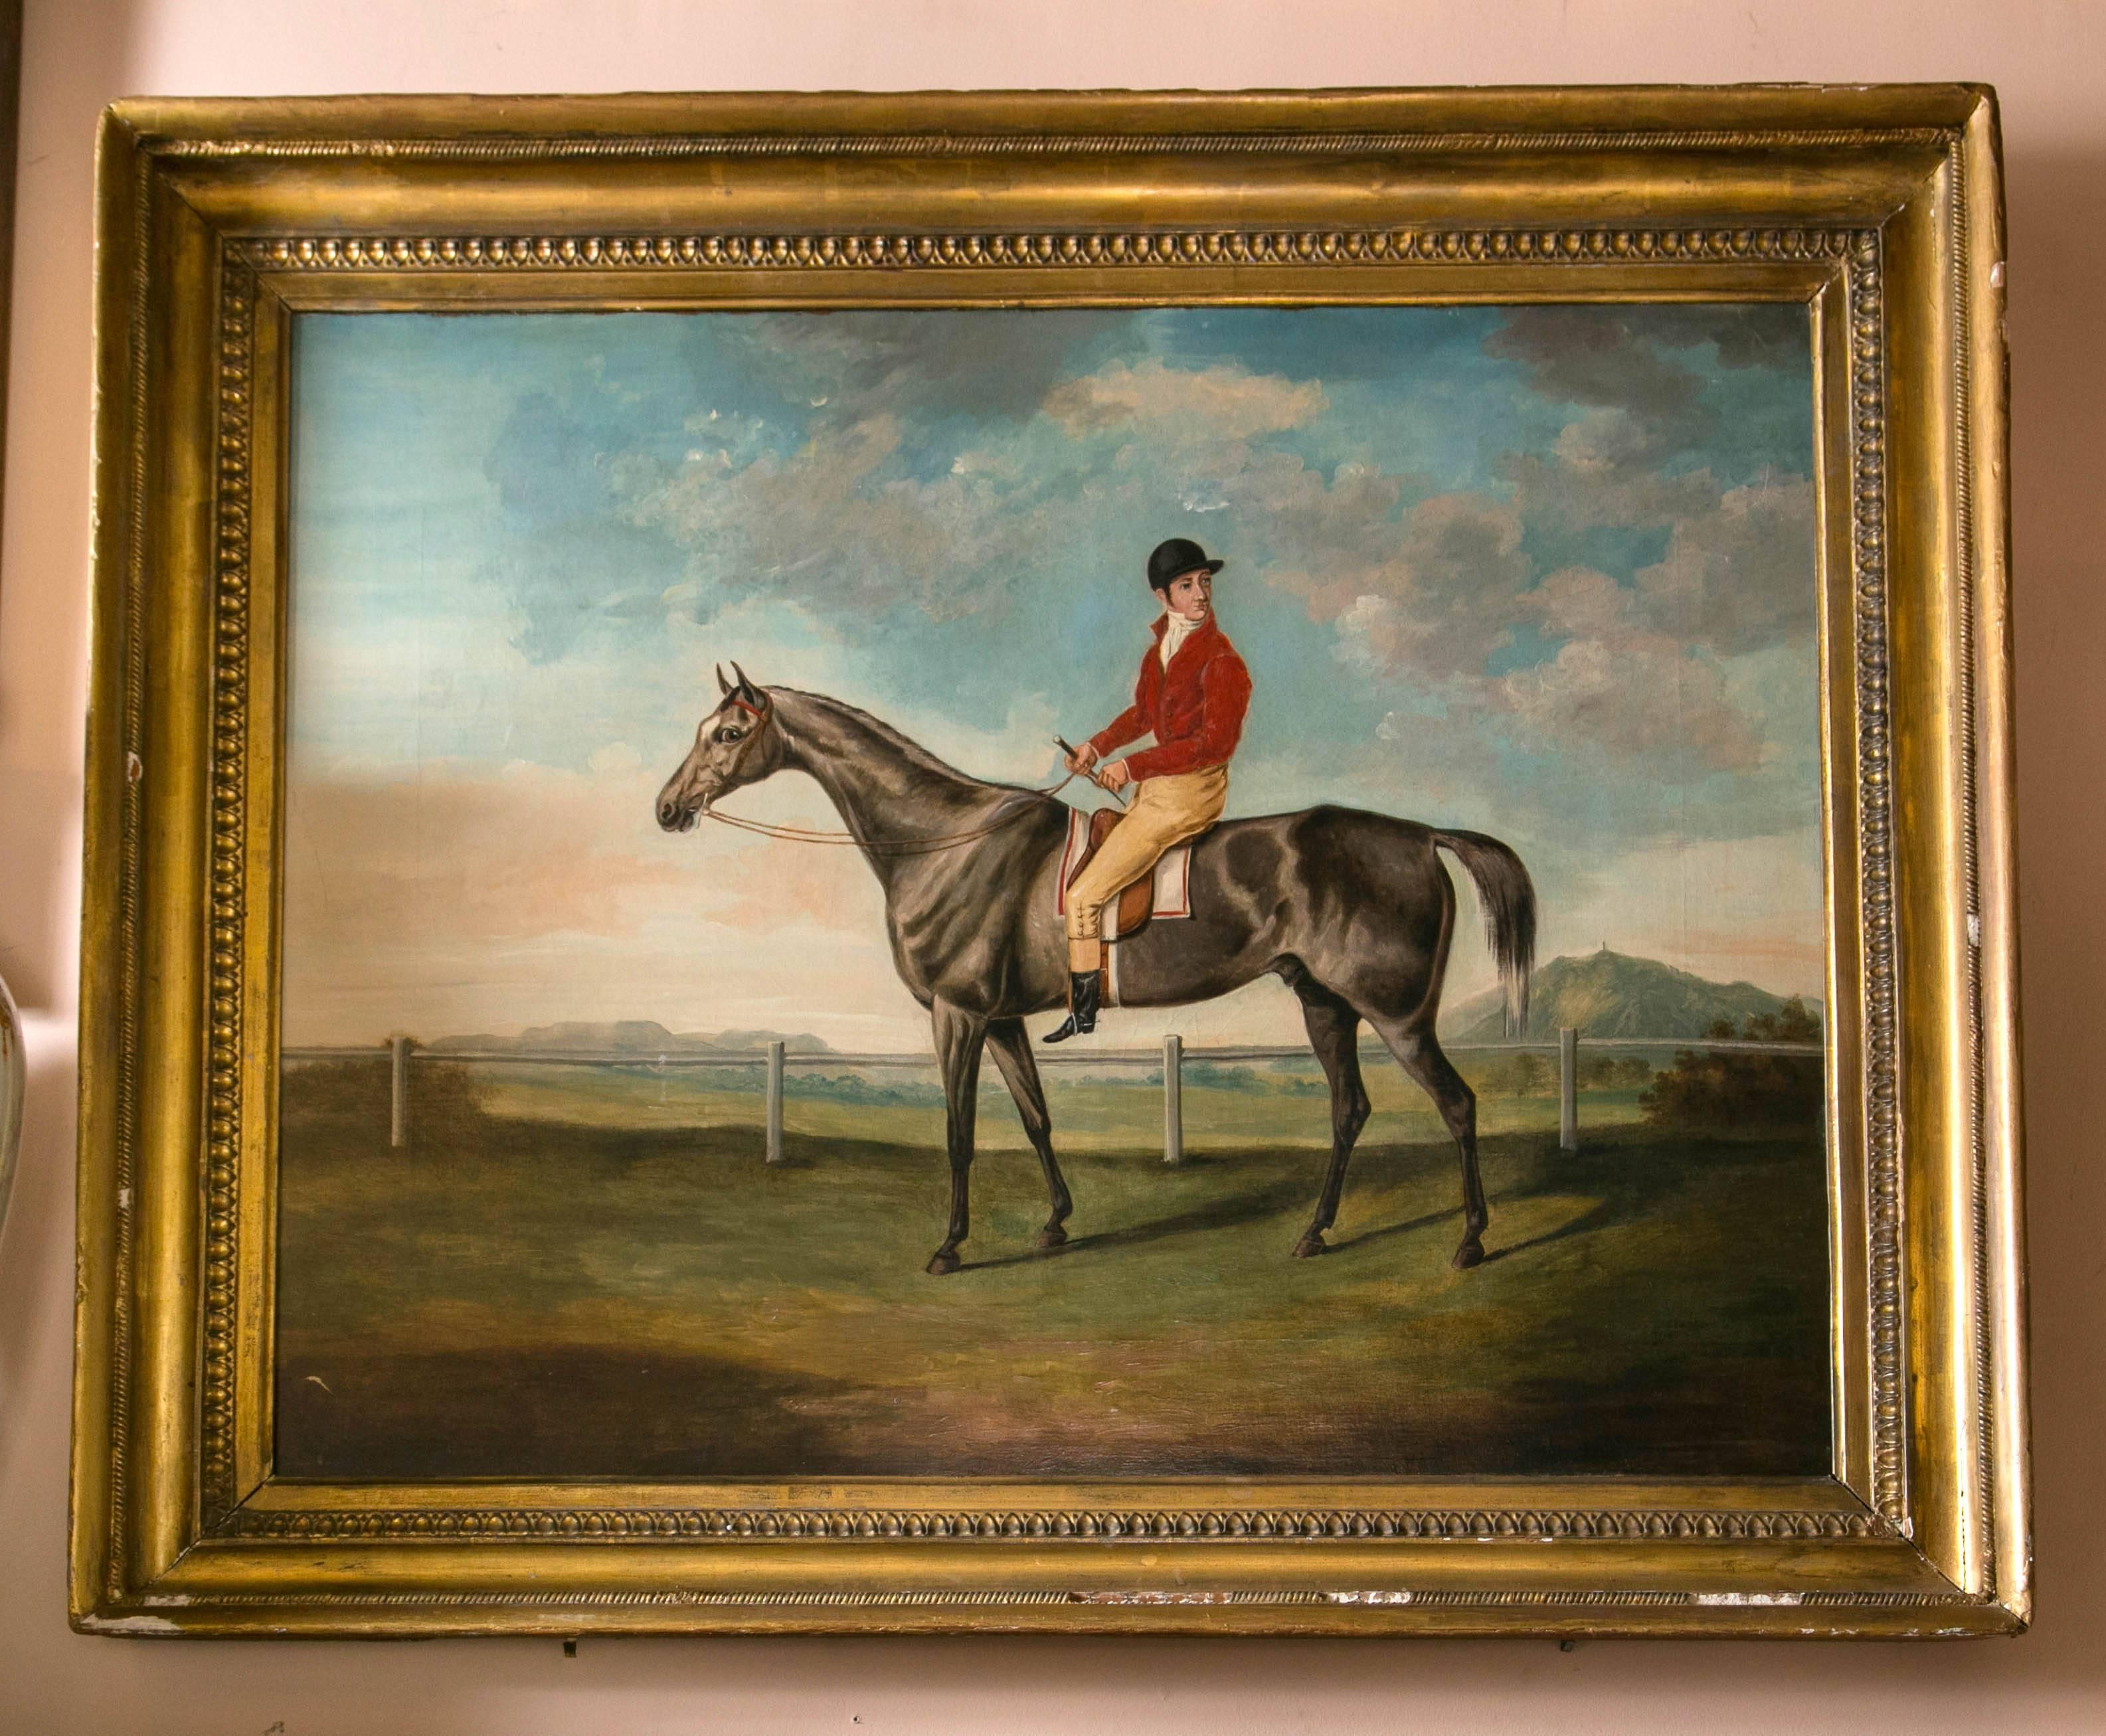 Dating from the second half of the 19th century, from England, with its period frame. The horse has a beautiful shimmering silver, grey coat. The jockey looking over his left shoulder. Set in a fenced area with blue skies and clouds.
The frame